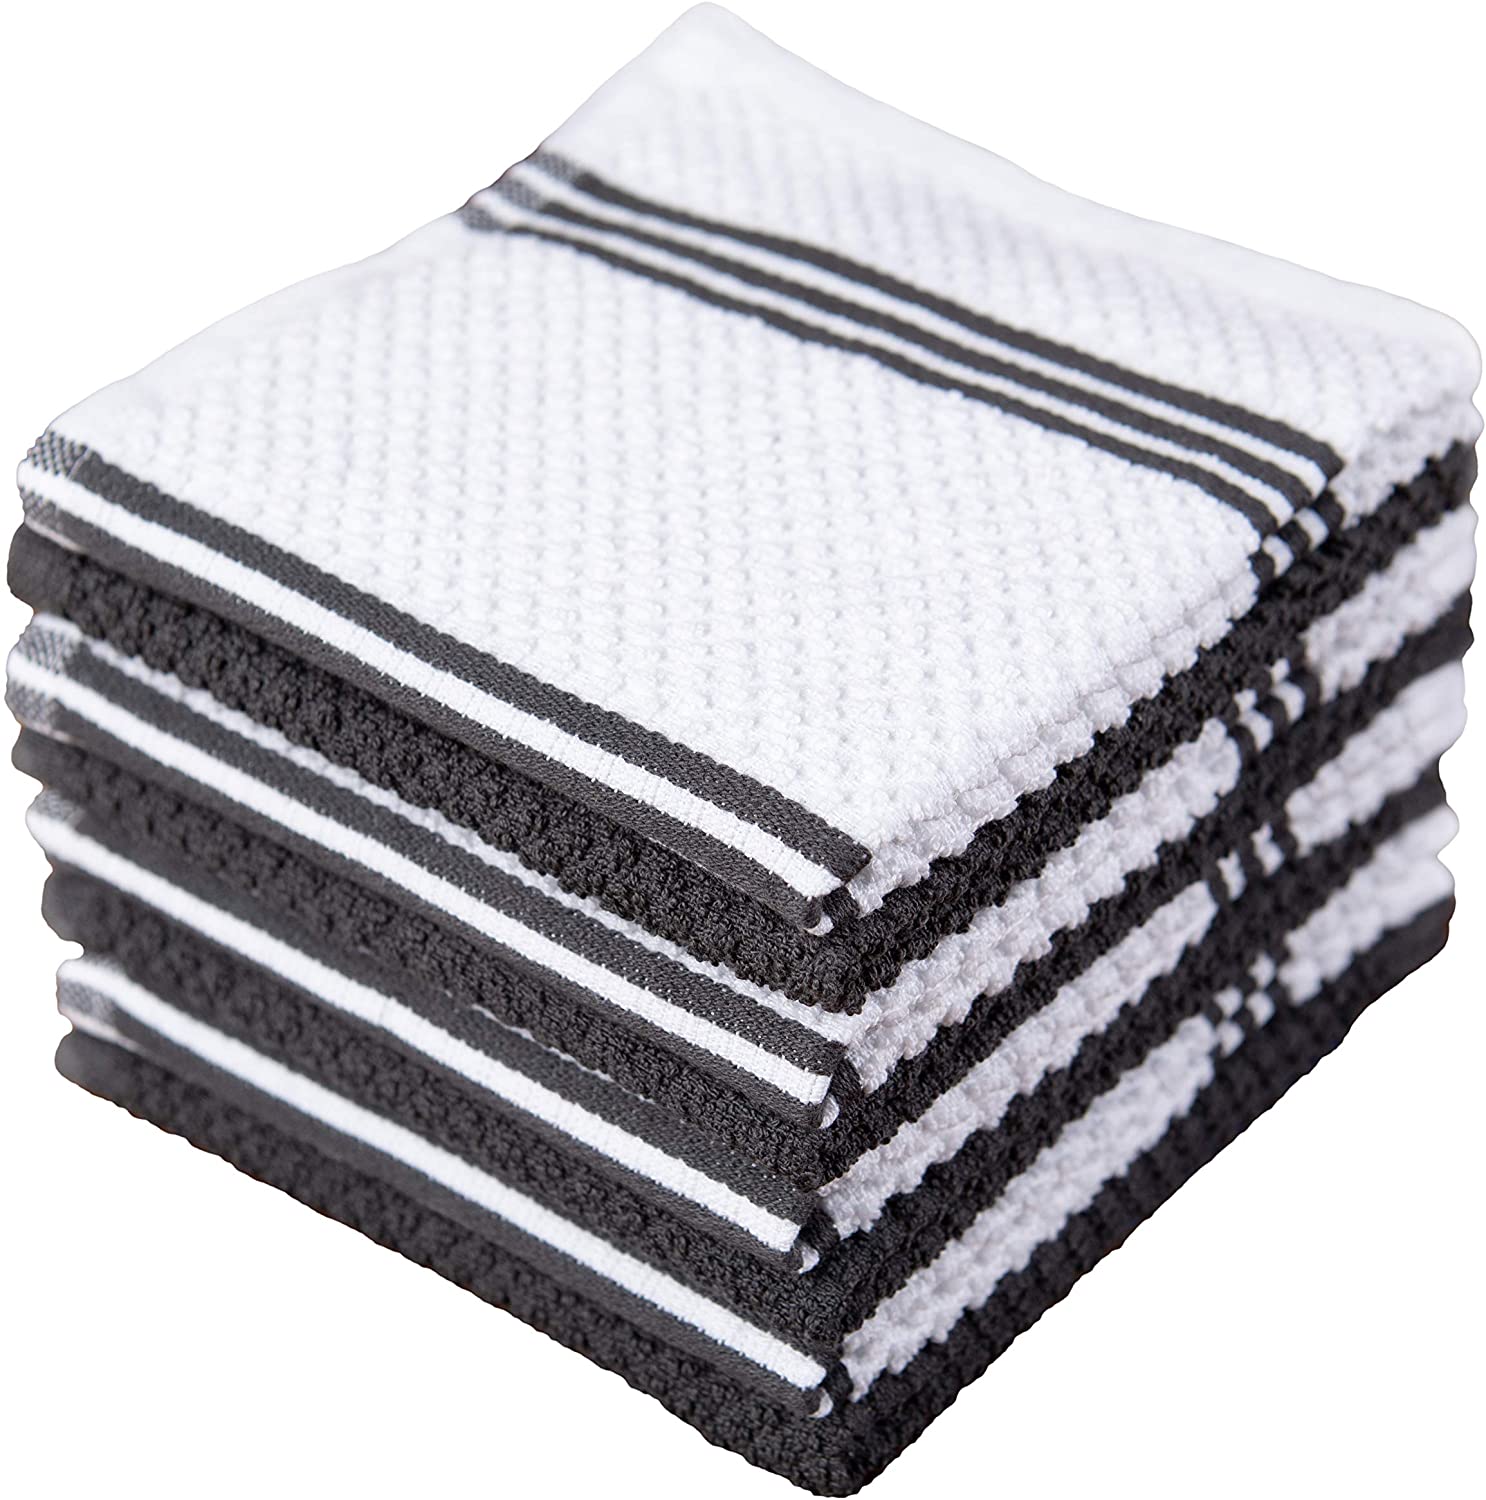 Sticky Toffee Kitchen Towels Dishcloths 100% Cotton, White Waffle